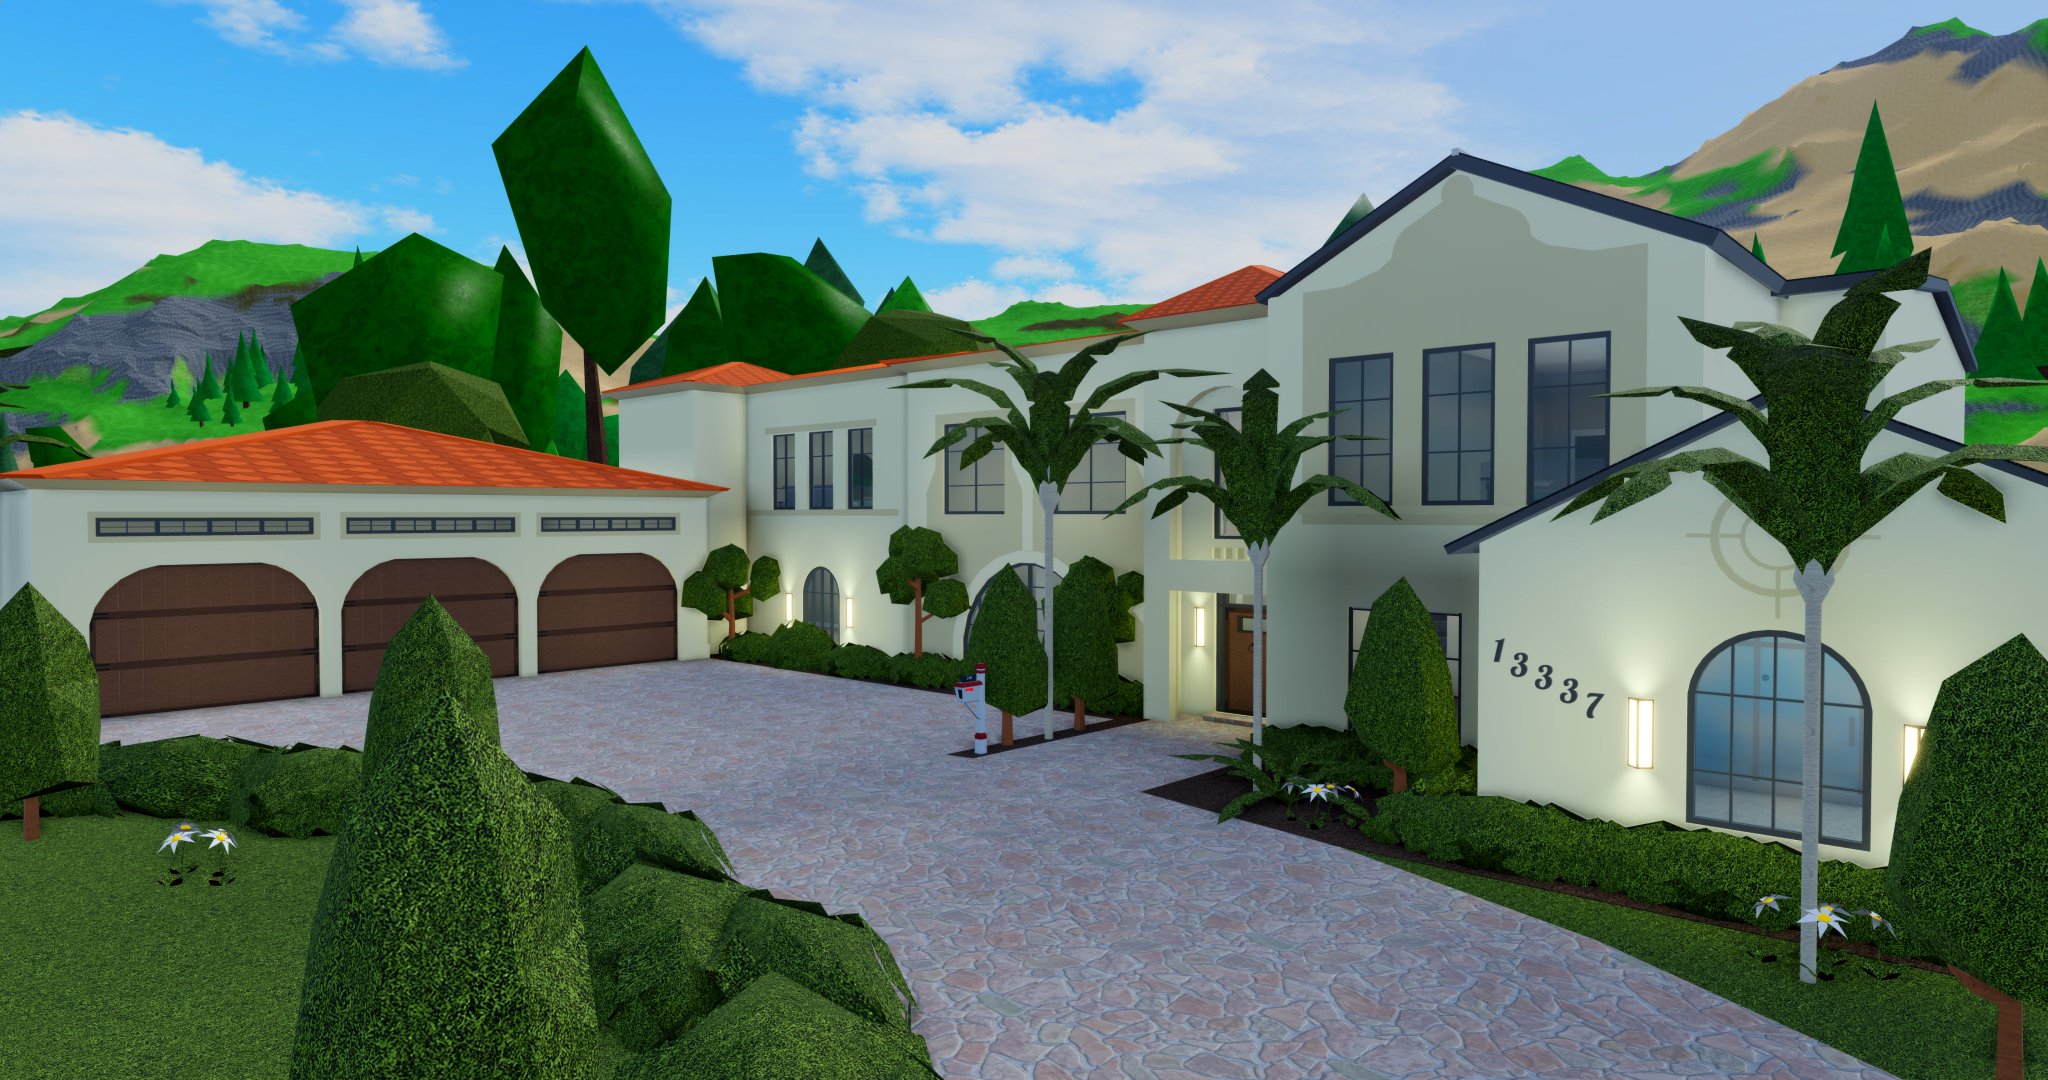 Ashcraft On Twitter Robloxian High School Is Getting A New Spanish Villa Built By Myself Check Out These Pictures Of It Robloxdev Roblox Https T Co E38odaxvwf - how to say roblox in spanish